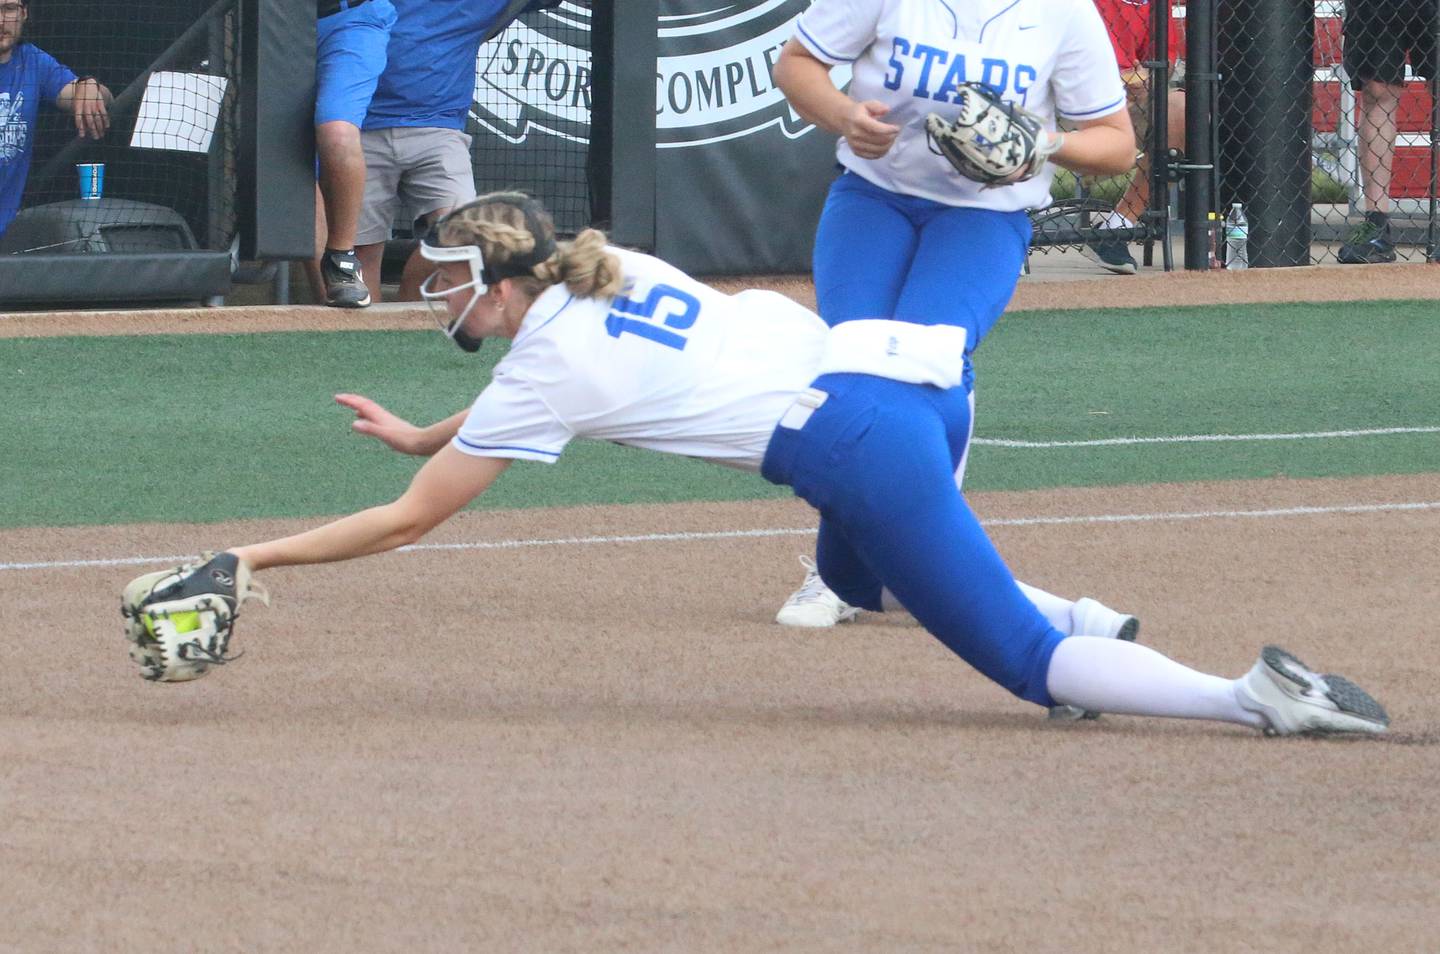 St. Charles North's Paige Murry makes a diving catch in front of home plate during the Class 4A championship game on Saturday, June 8, 2024 at the Louisville Slugger Sports Complex in Peoria.